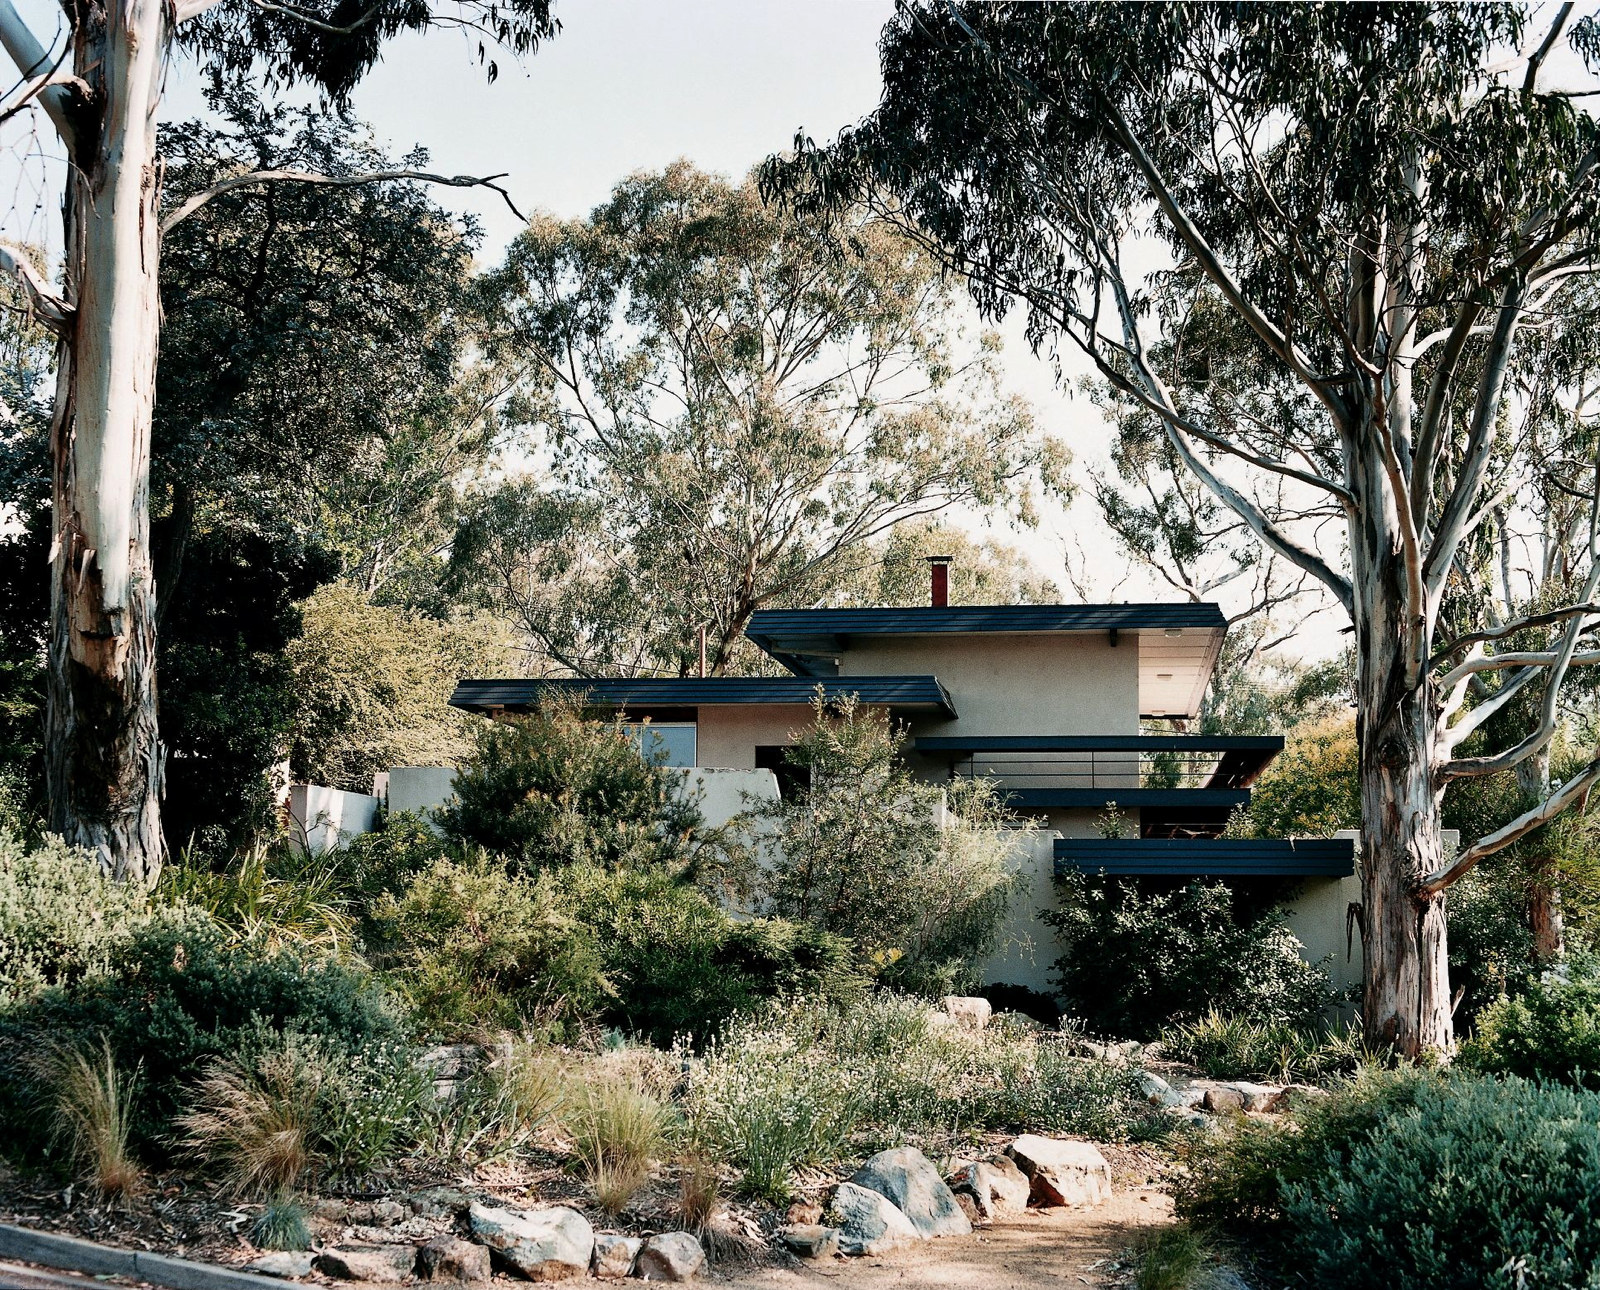 This is a photograph of a split level house set among tress and a natural bush landscape